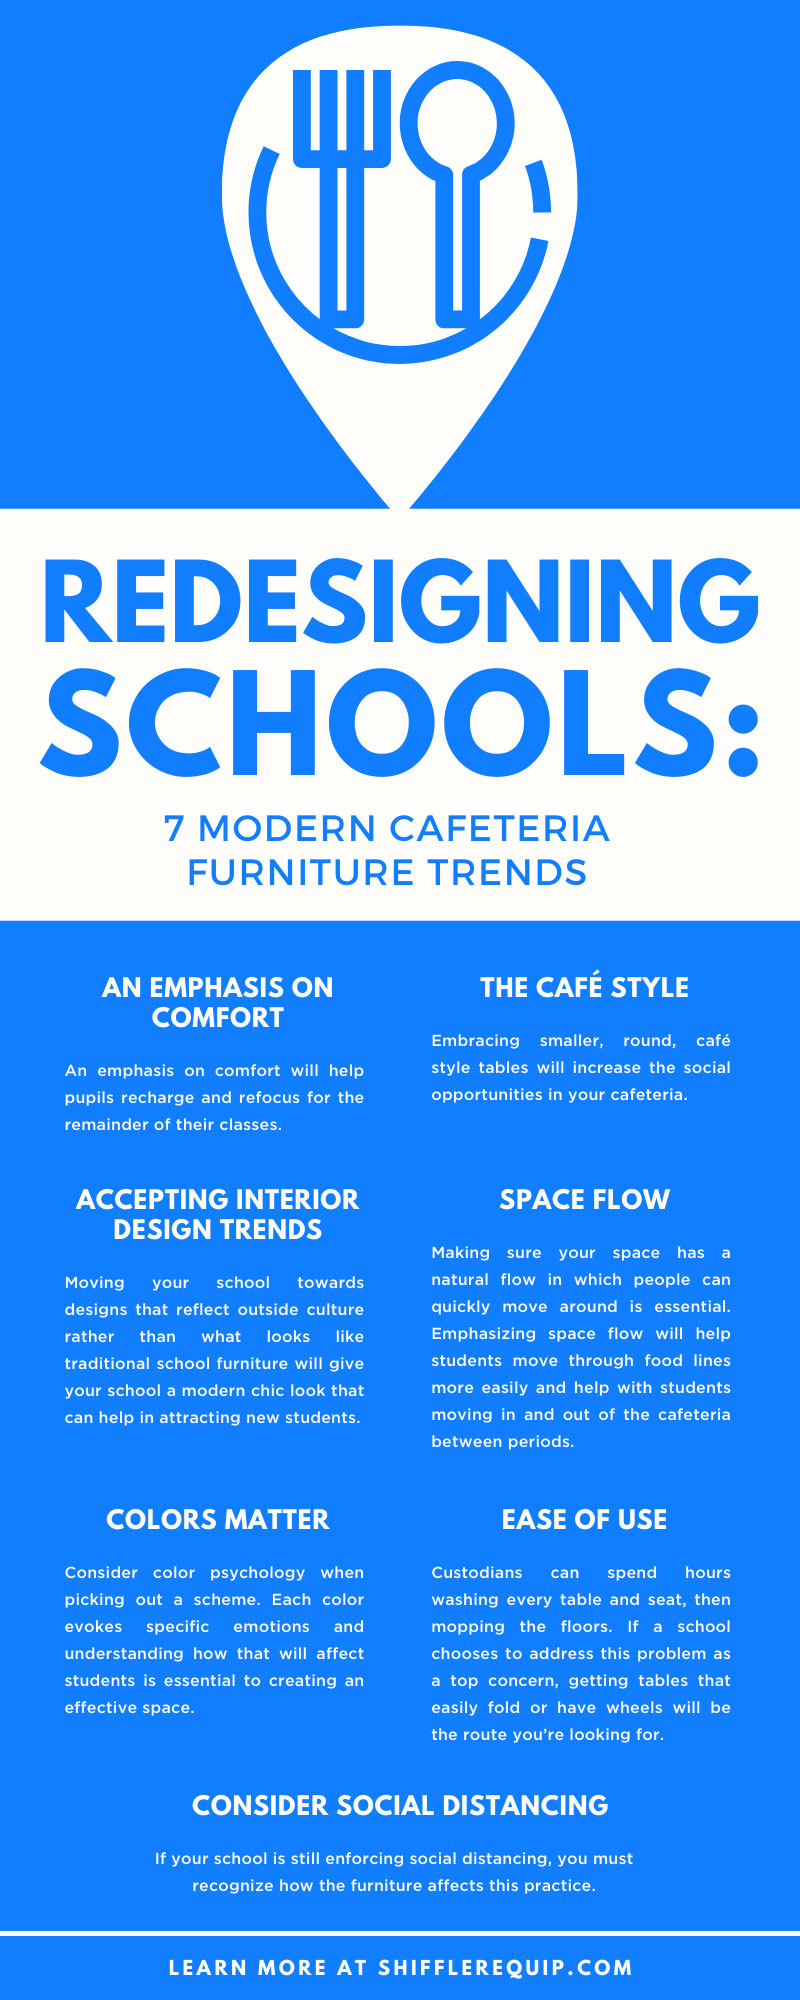 Redesigning Schools: 7 Modern Cafeteria Furniture Trends